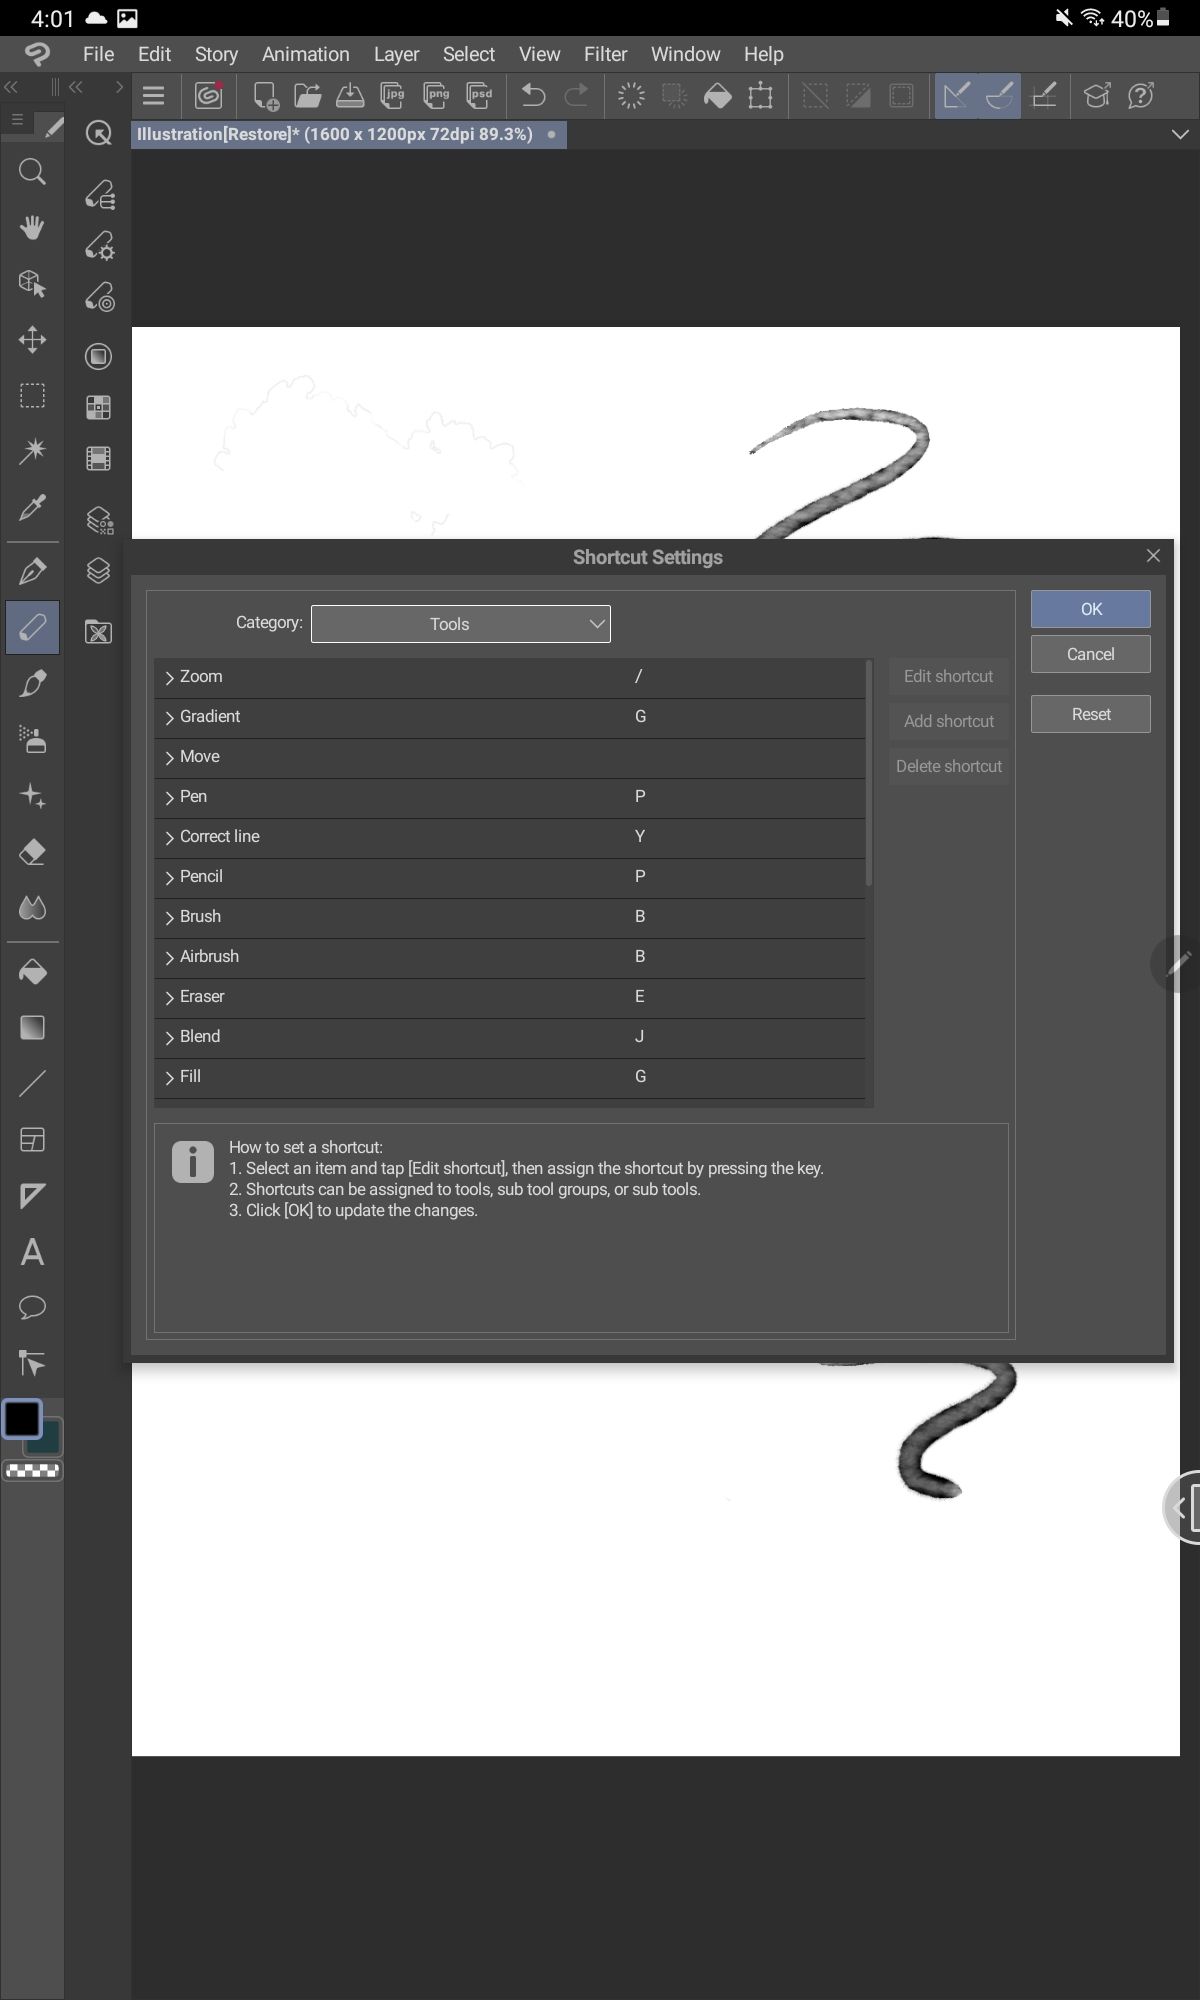 Just like on the desktop program, you can customize keyboard shortcuts on the Android version of Clip Studio Paint.